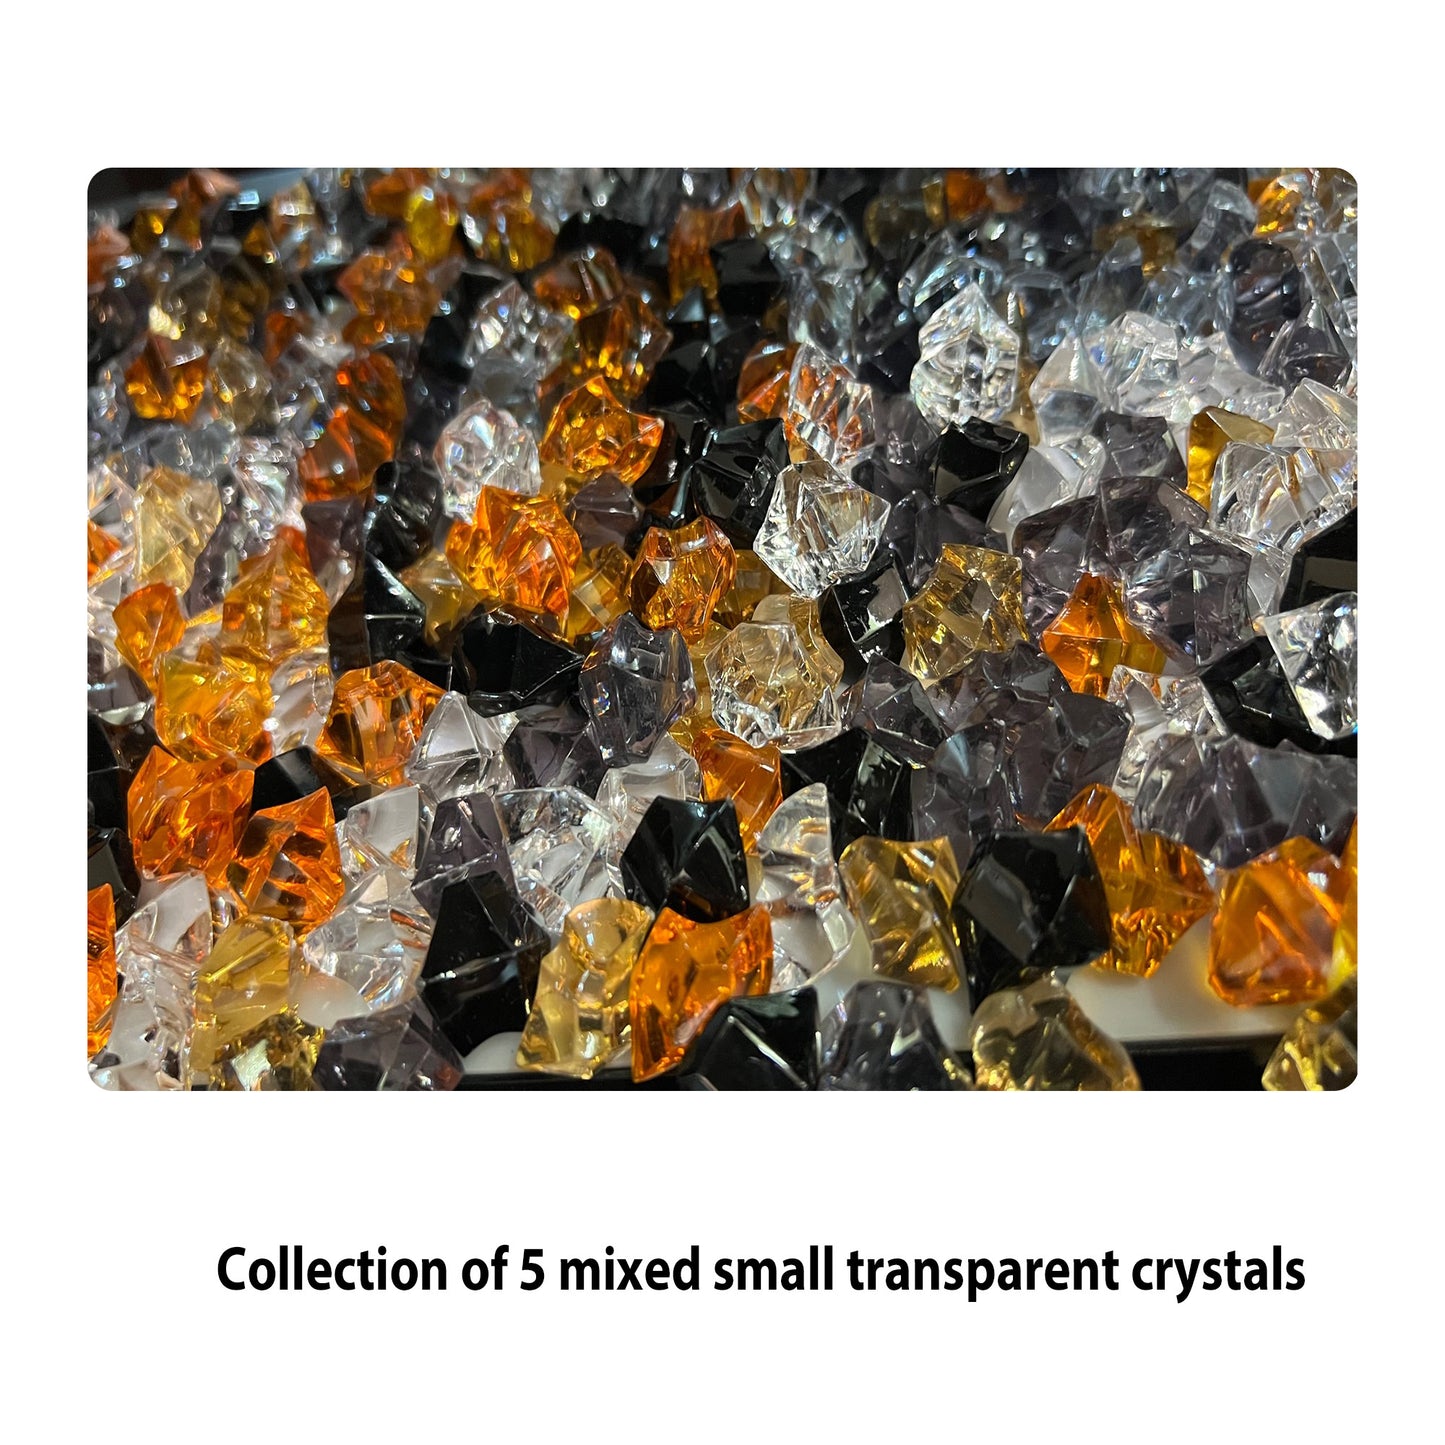 Zopaflame Crystals Decor Media Kit for 45-48 inch fireplace